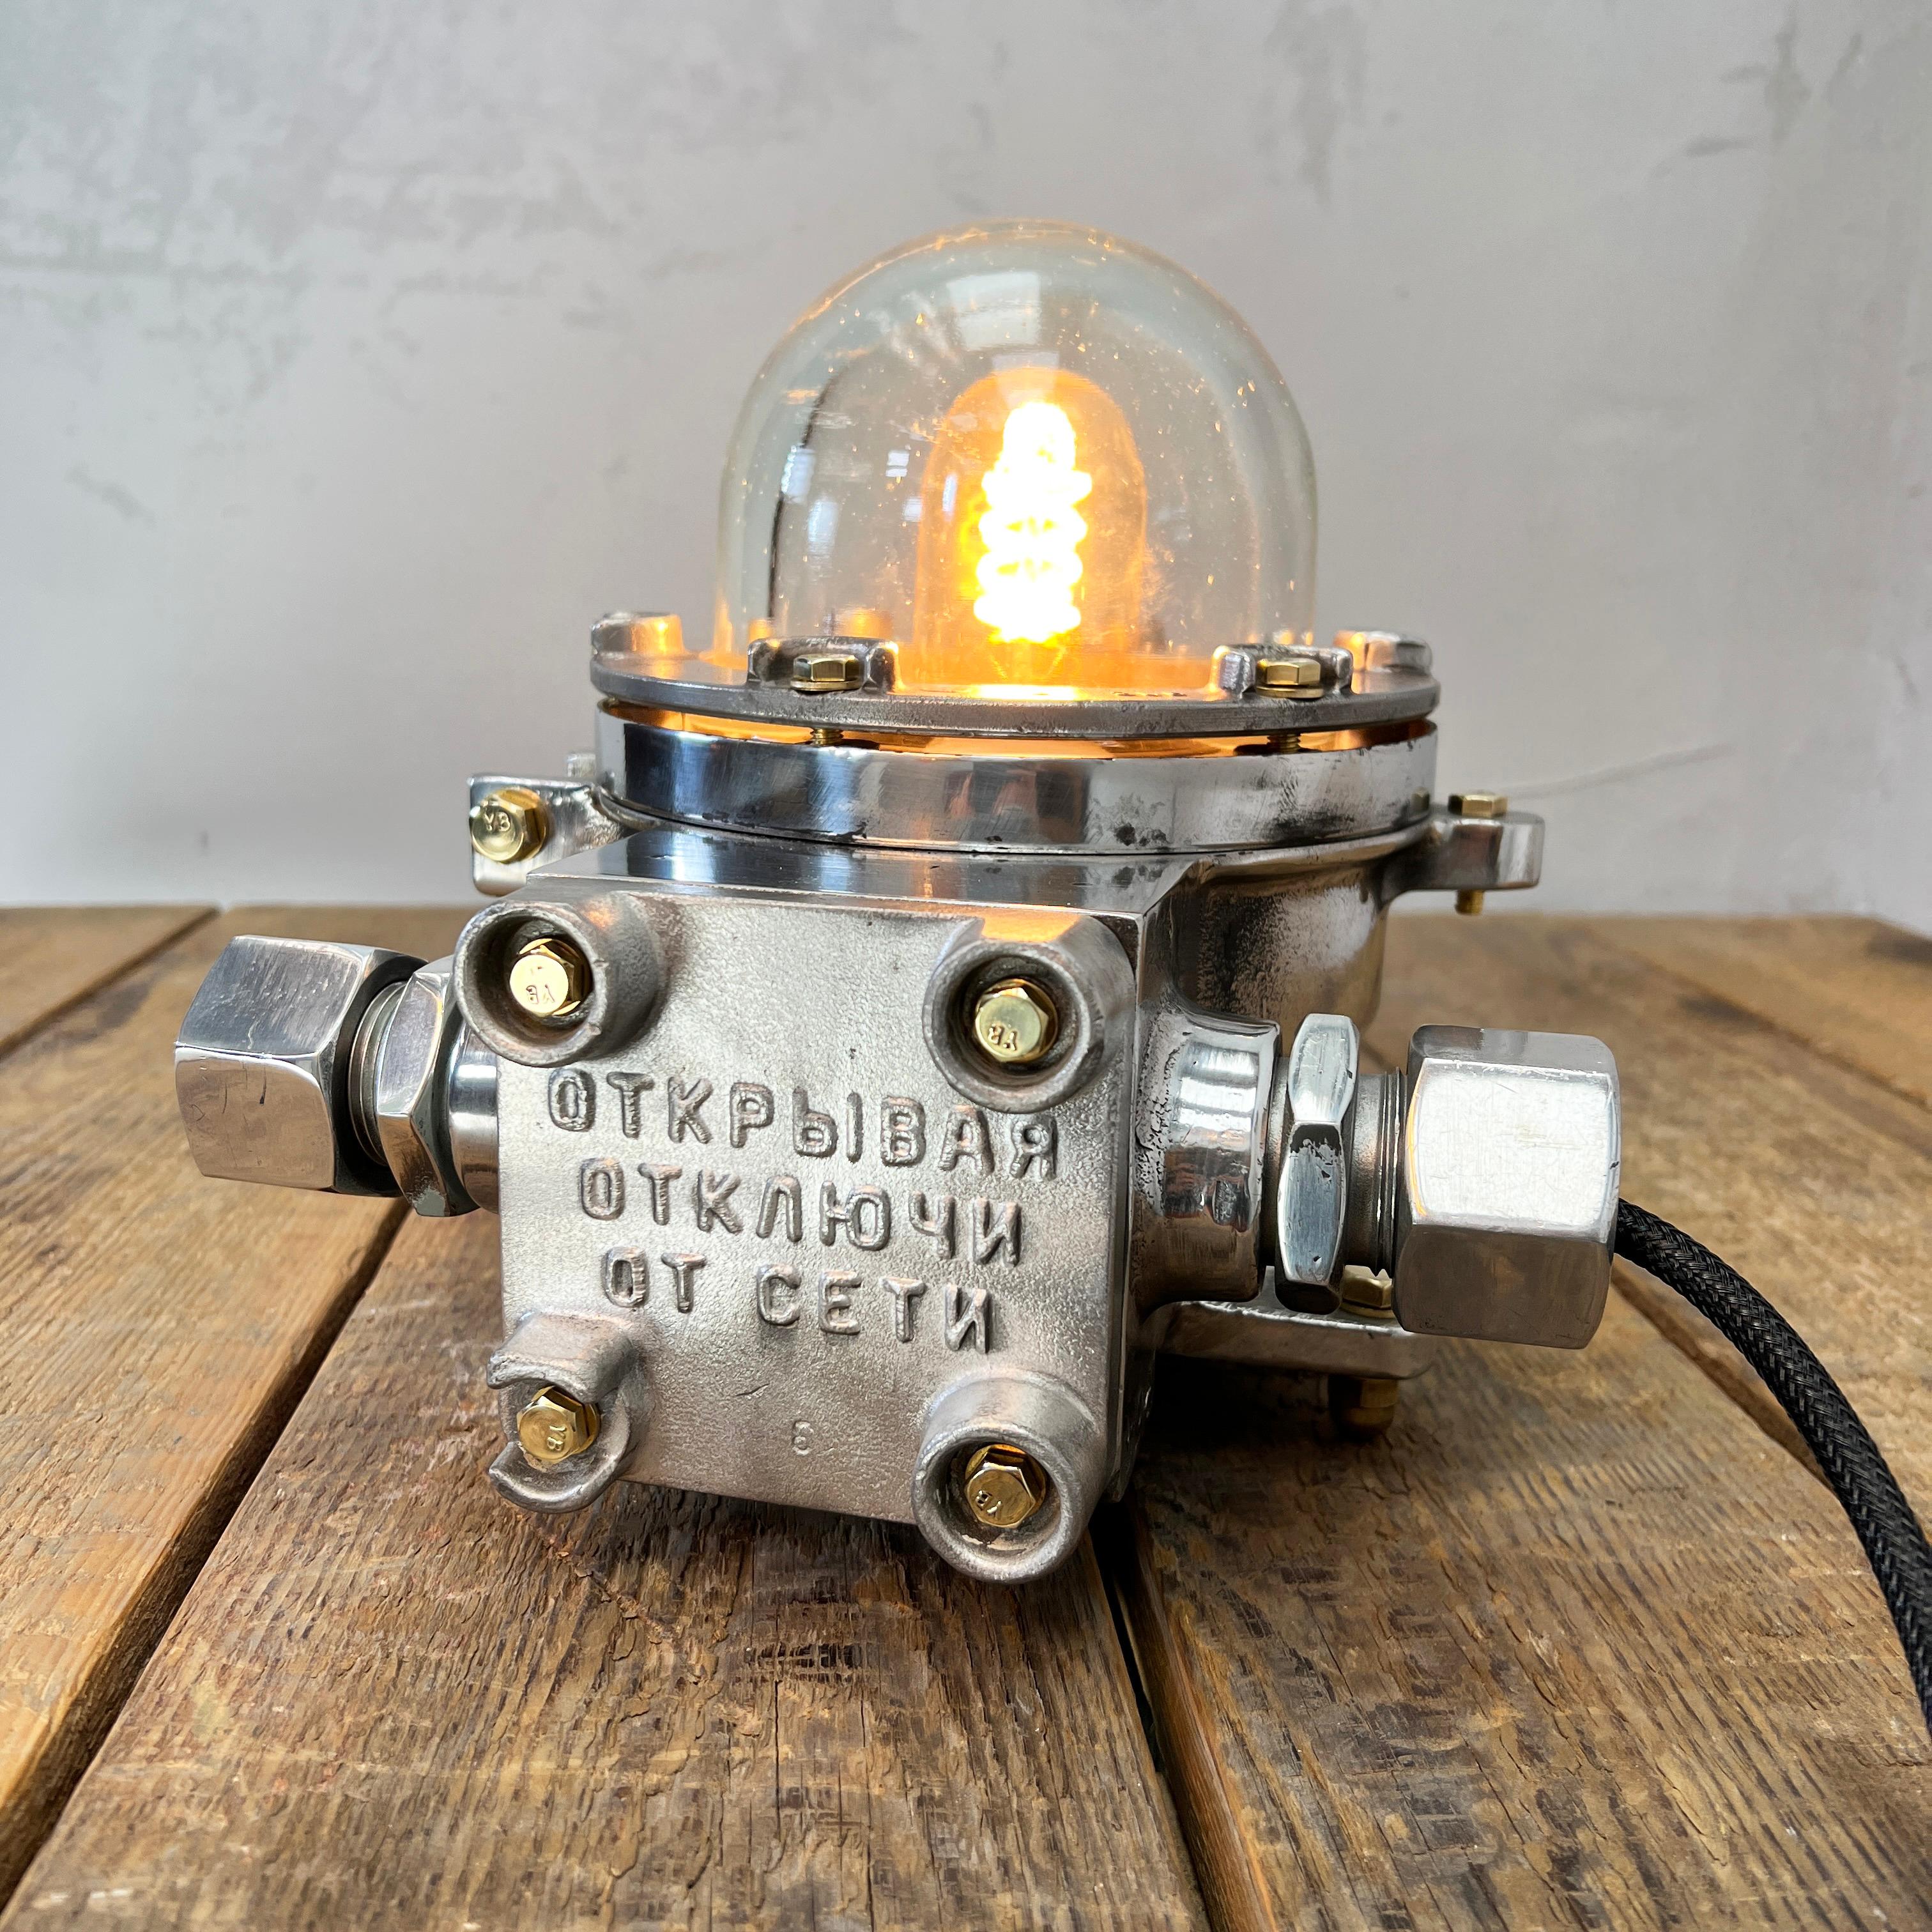 Eastern Bloc naval aluminium lamp reclaimed from decommissioned 1980's cargo ships. Professionally restored and rewired by hand in our workshop, ready to be reused in modern interiors or outdoor living spaces. 

This variant was originally a wall